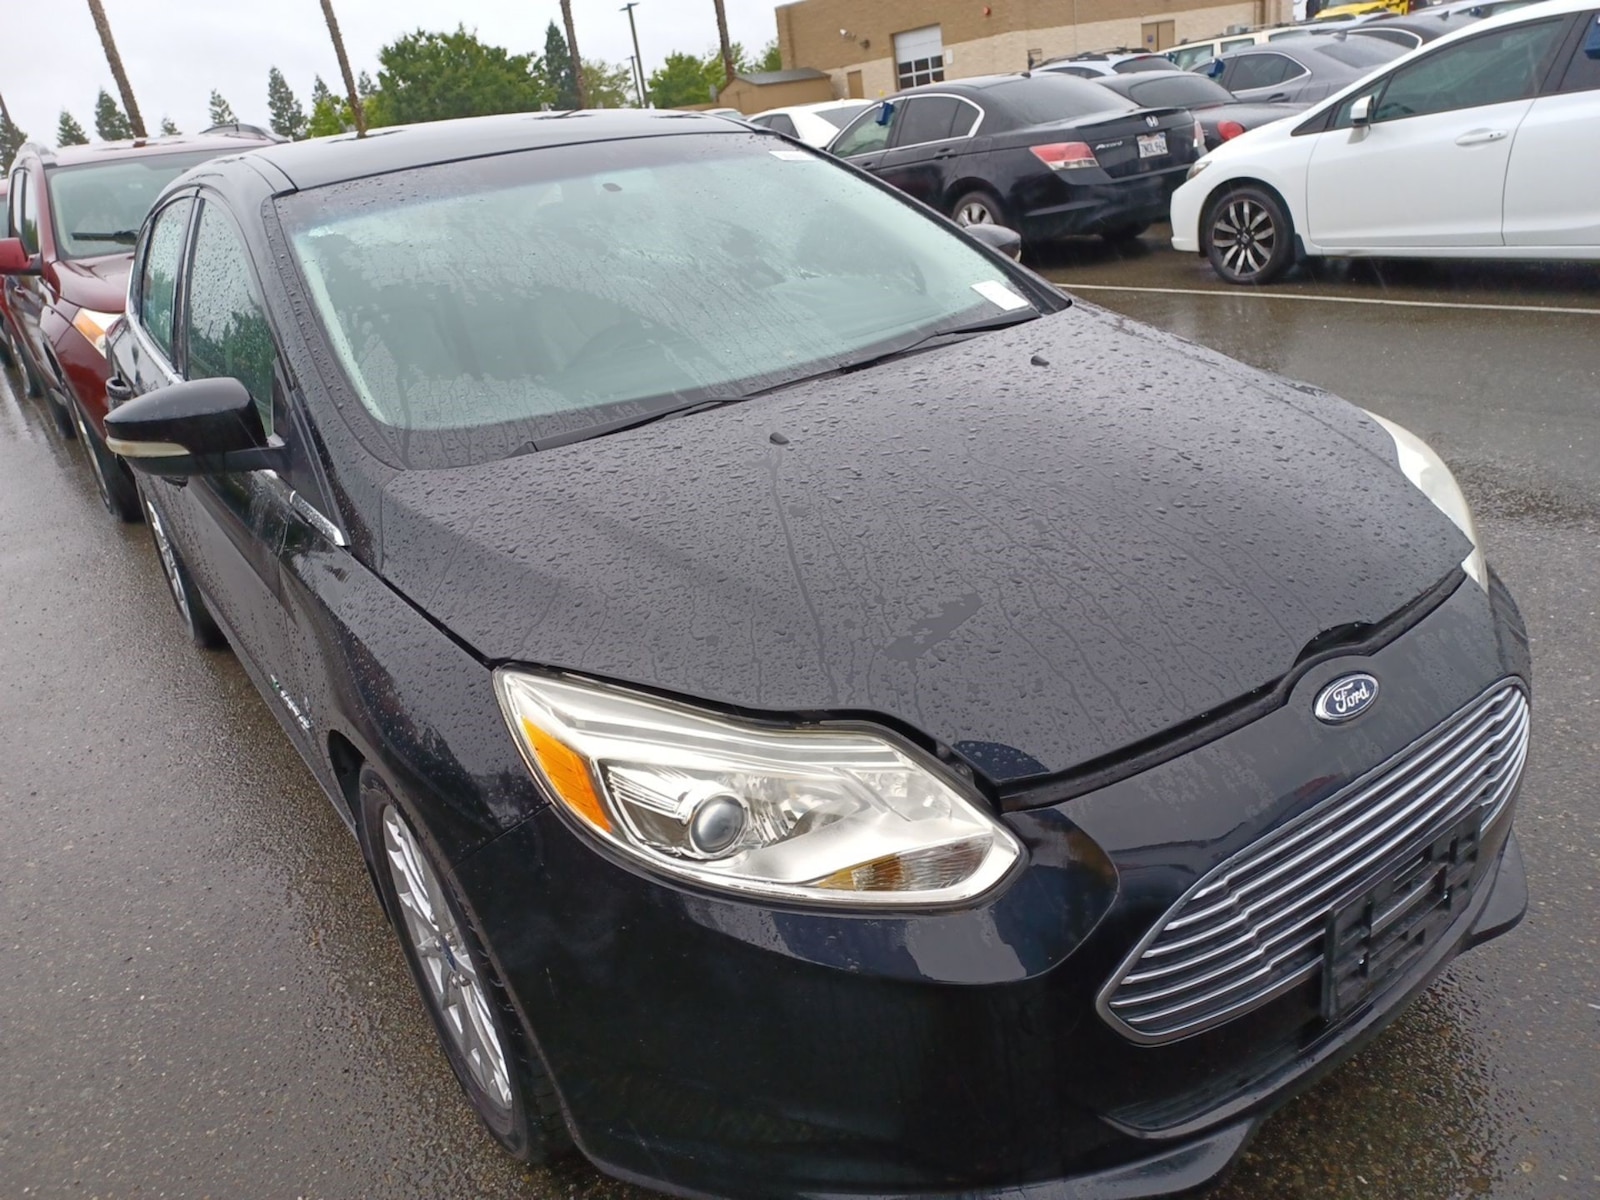 Used 2013 Ford Focus Electric with VIN 1FADP3R45DL139877 for sale in Kenosha, WI